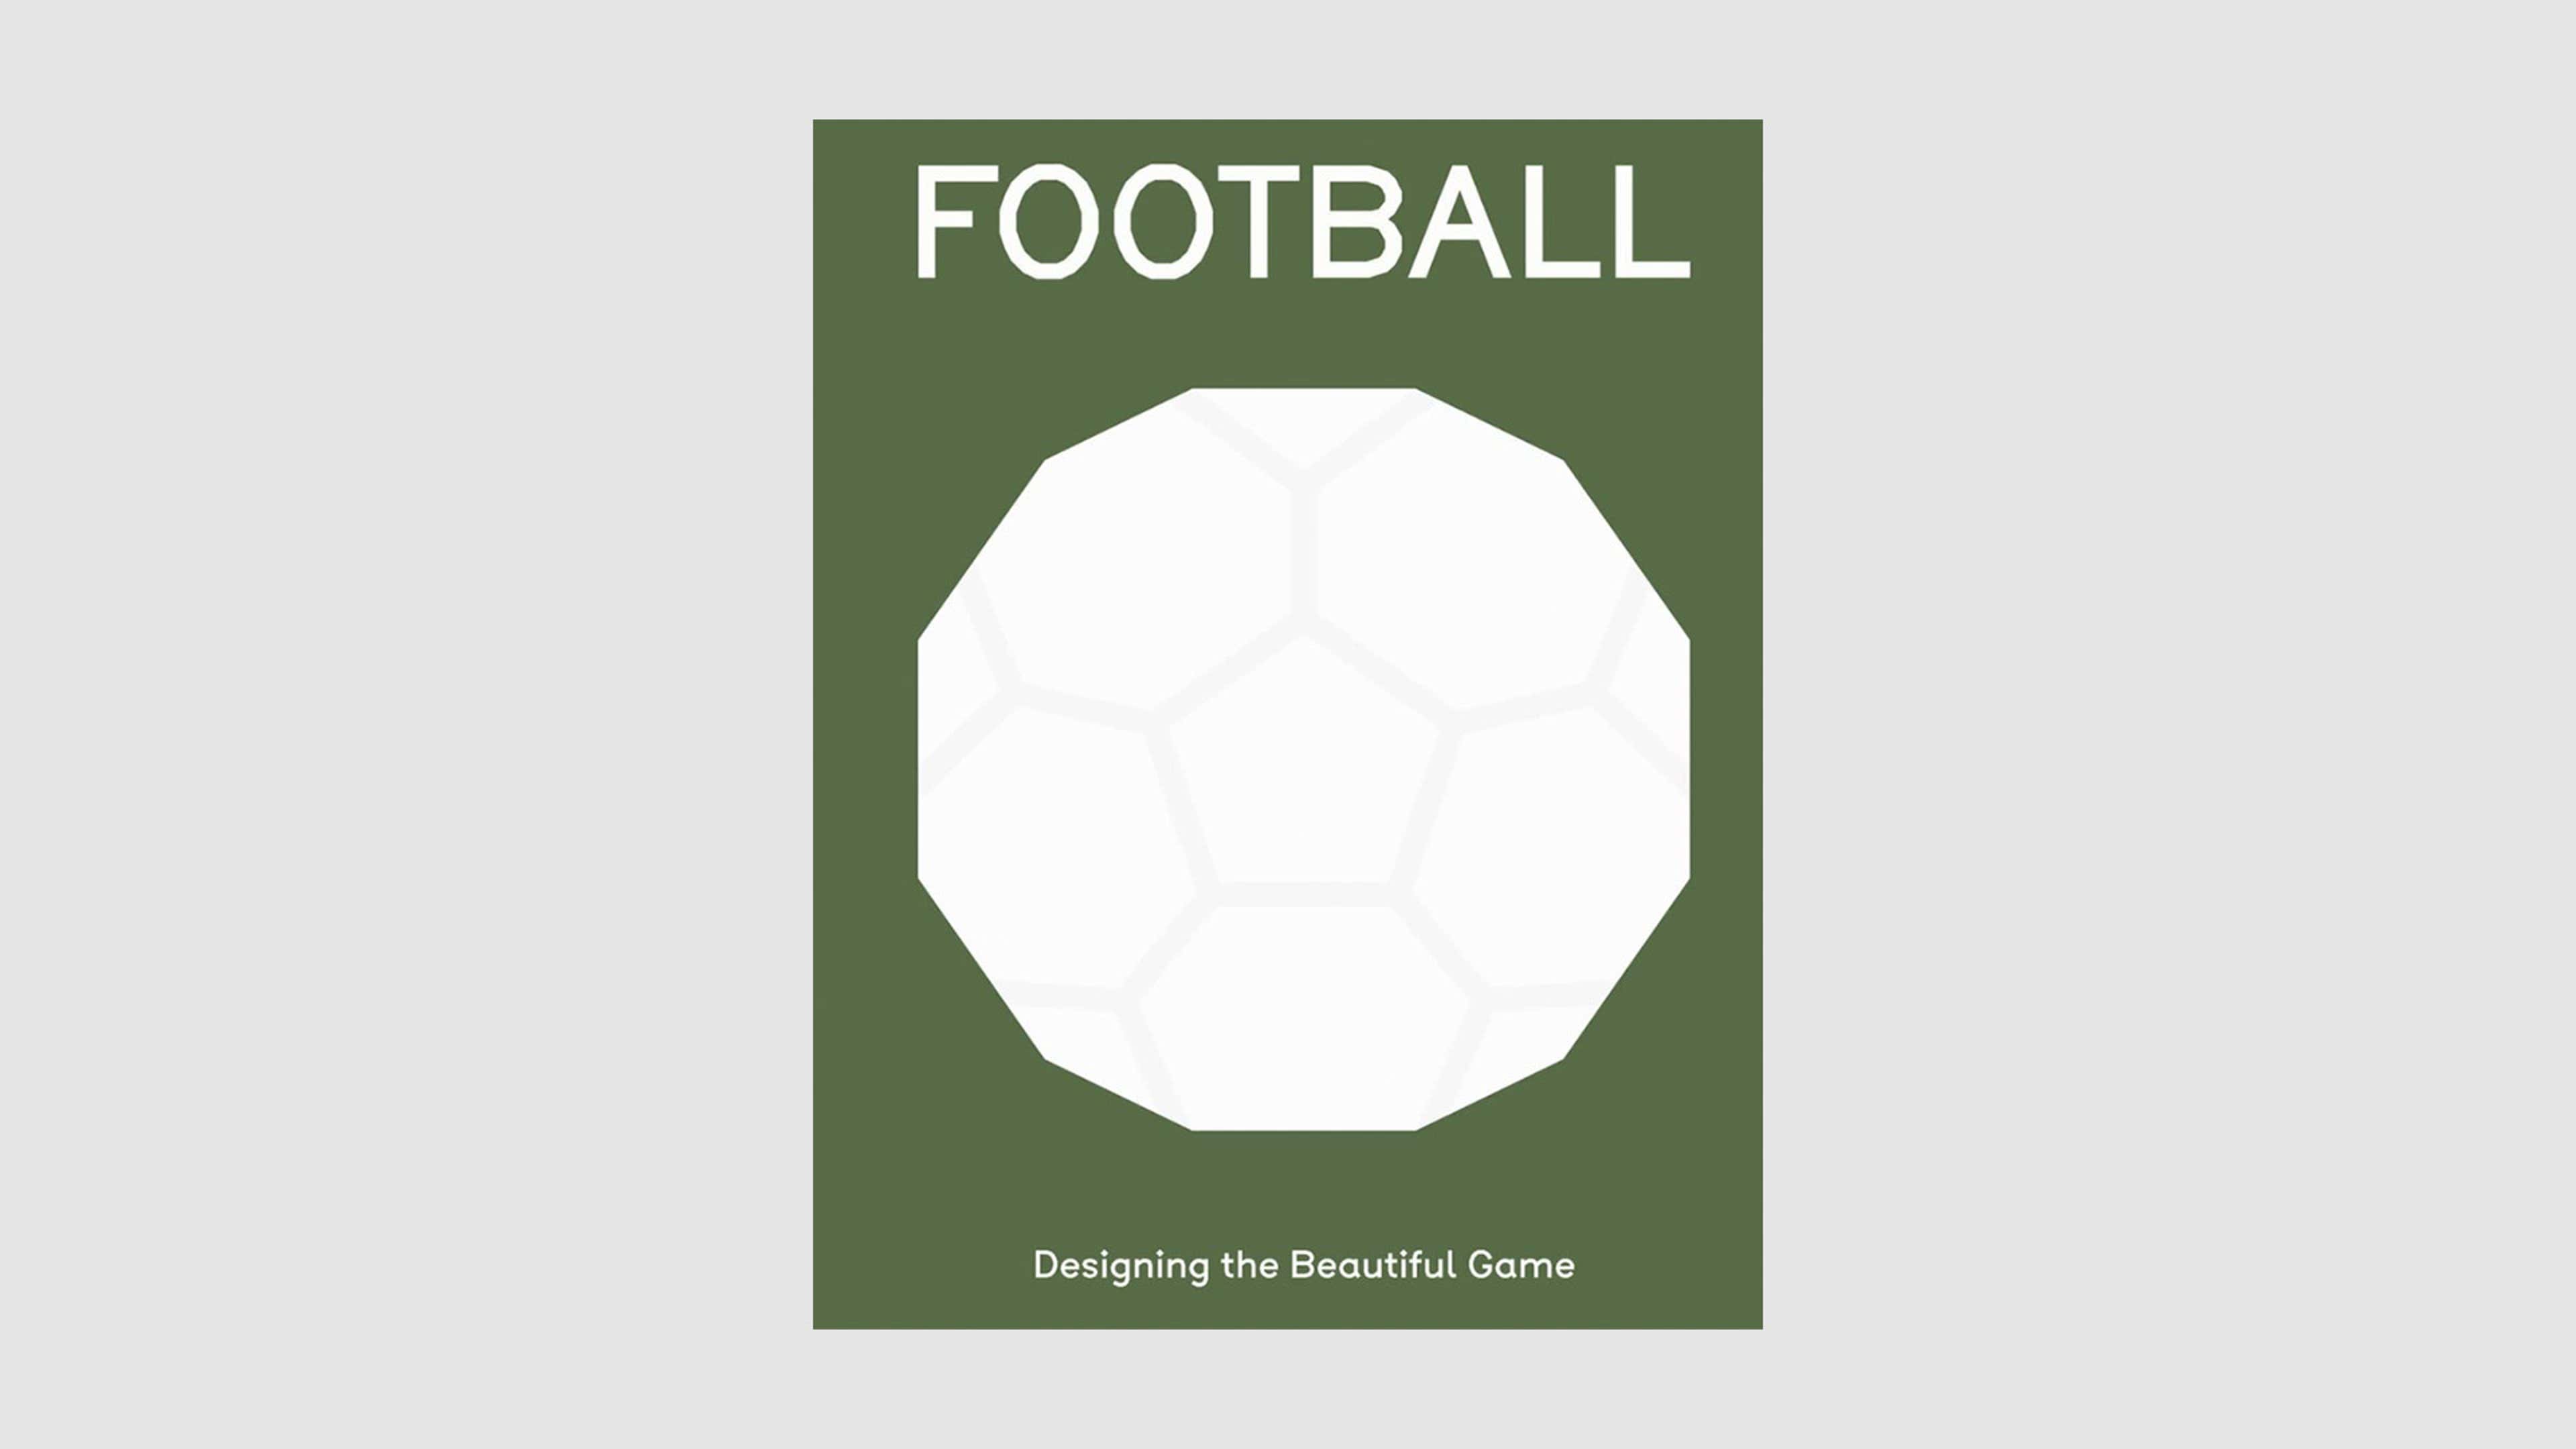 Football rules: How to play the beautiful game